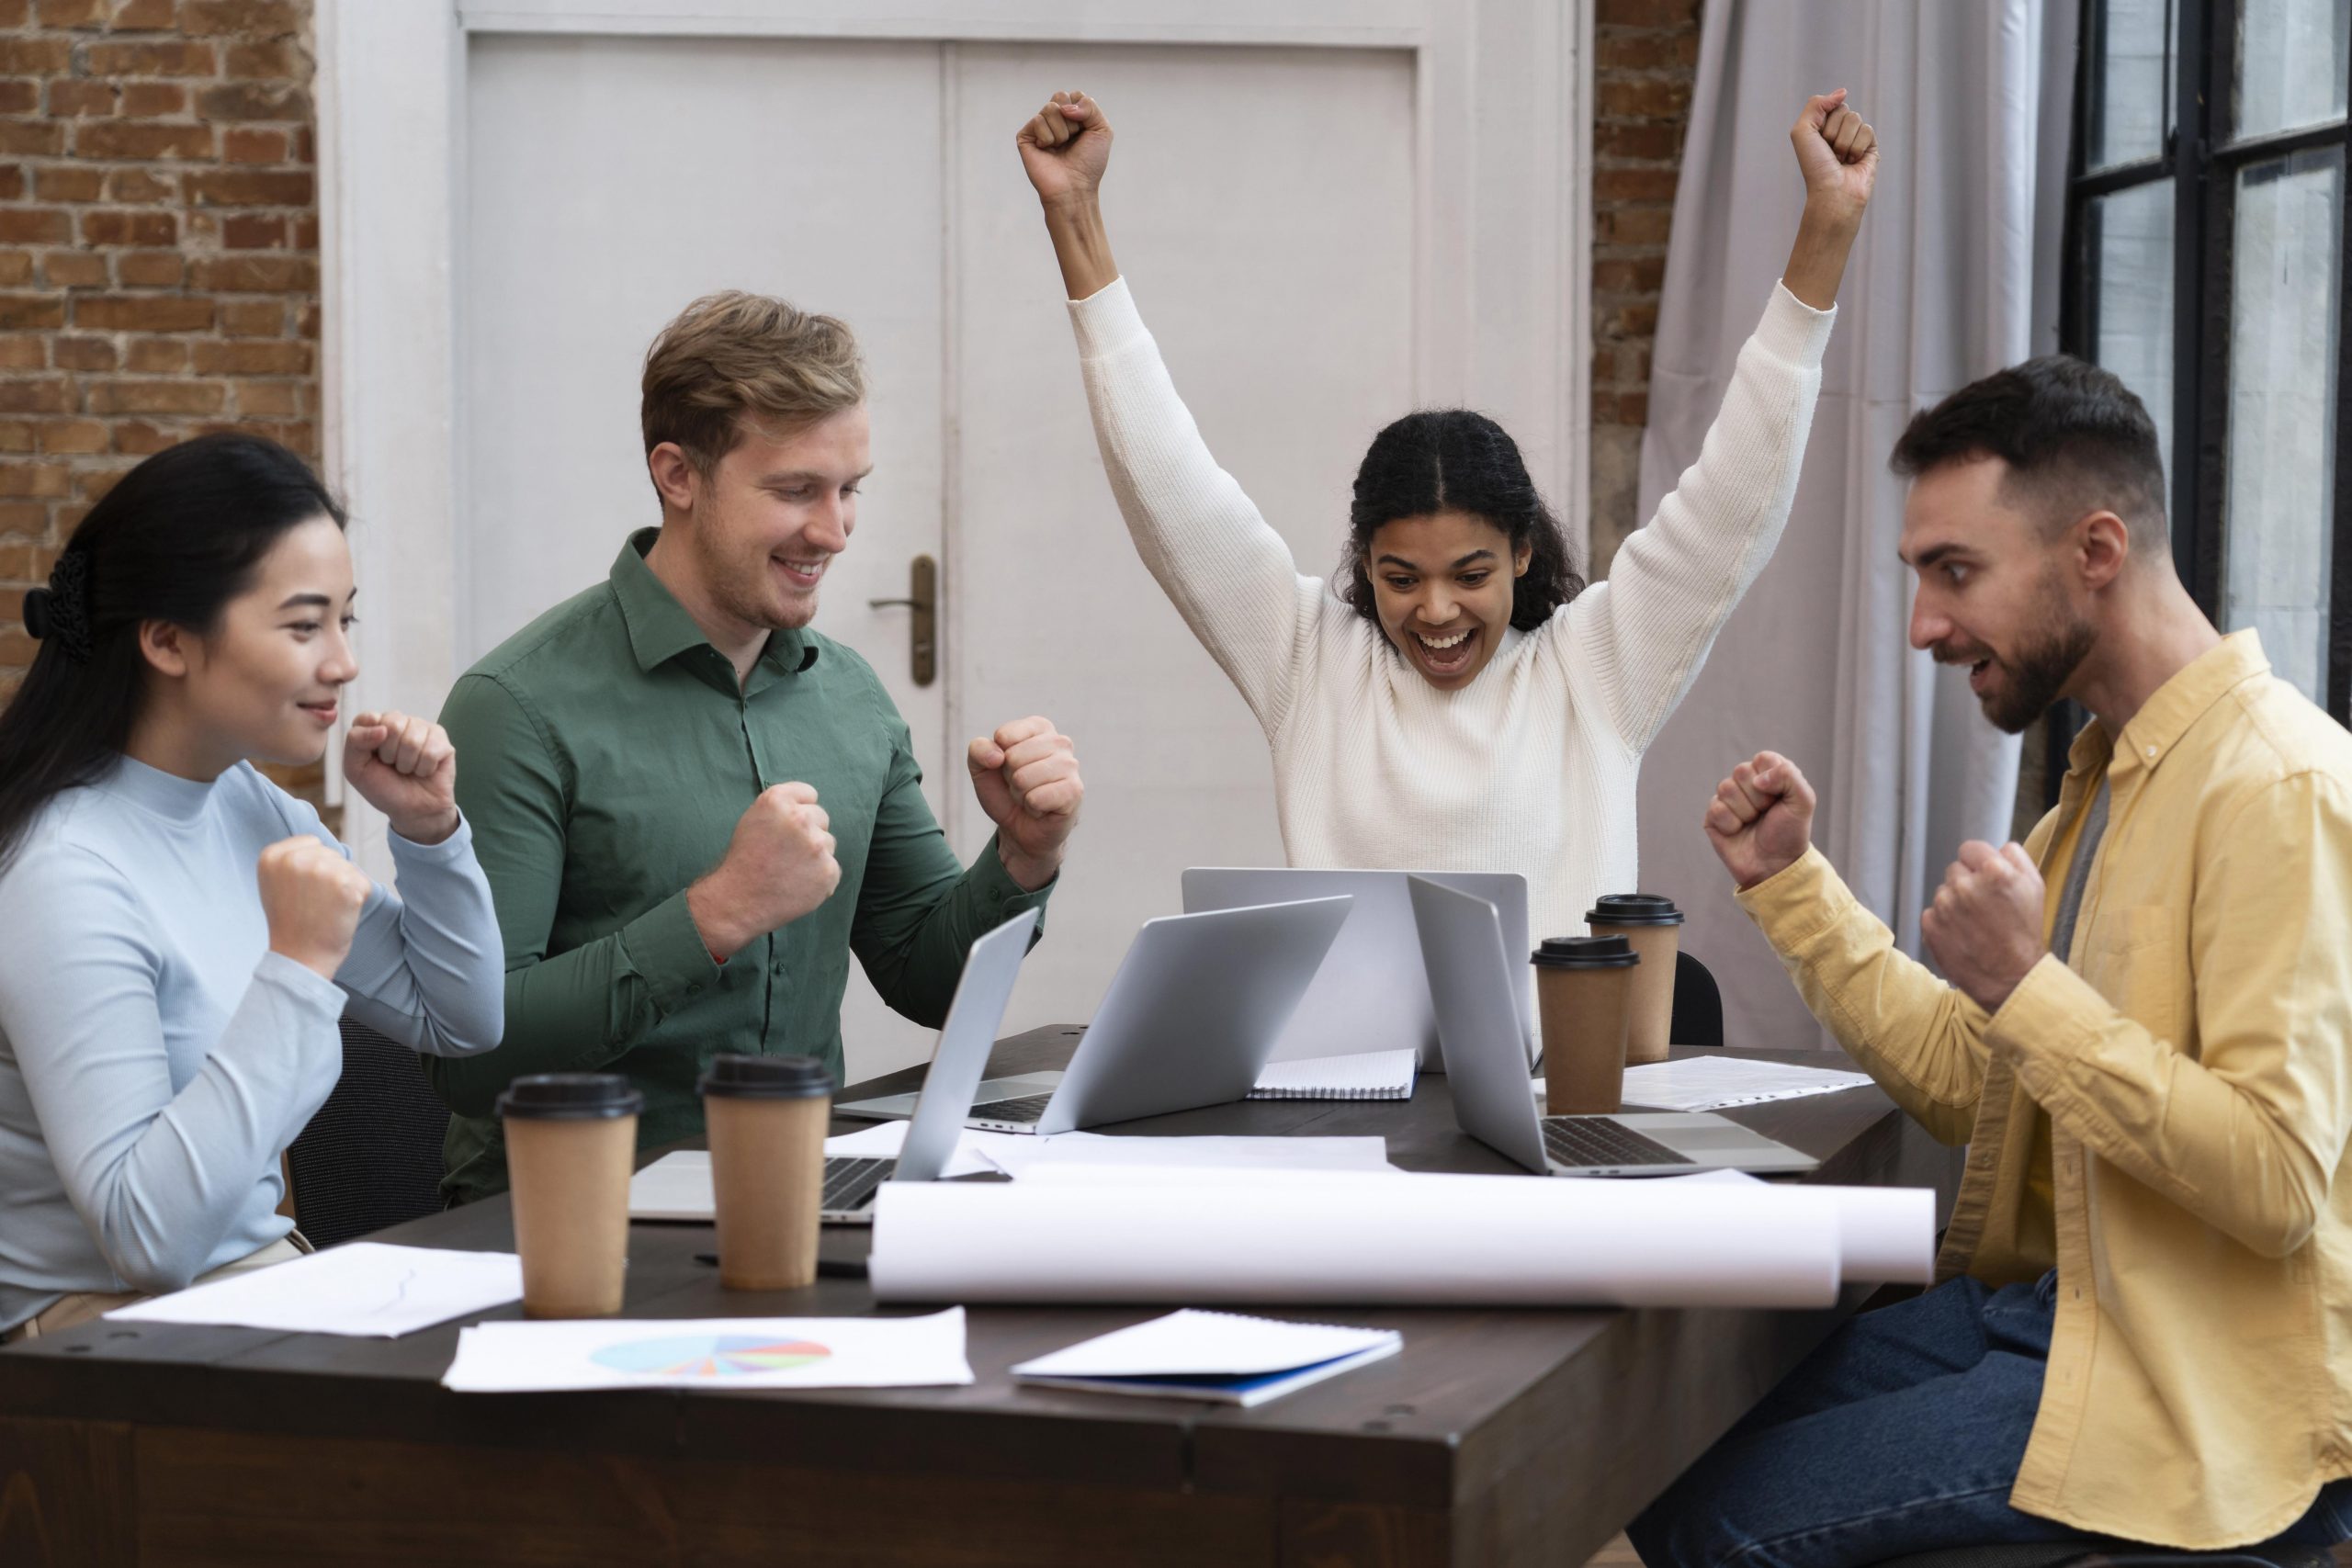 Boosting employee morale: The power of employee encouragement in the workplace